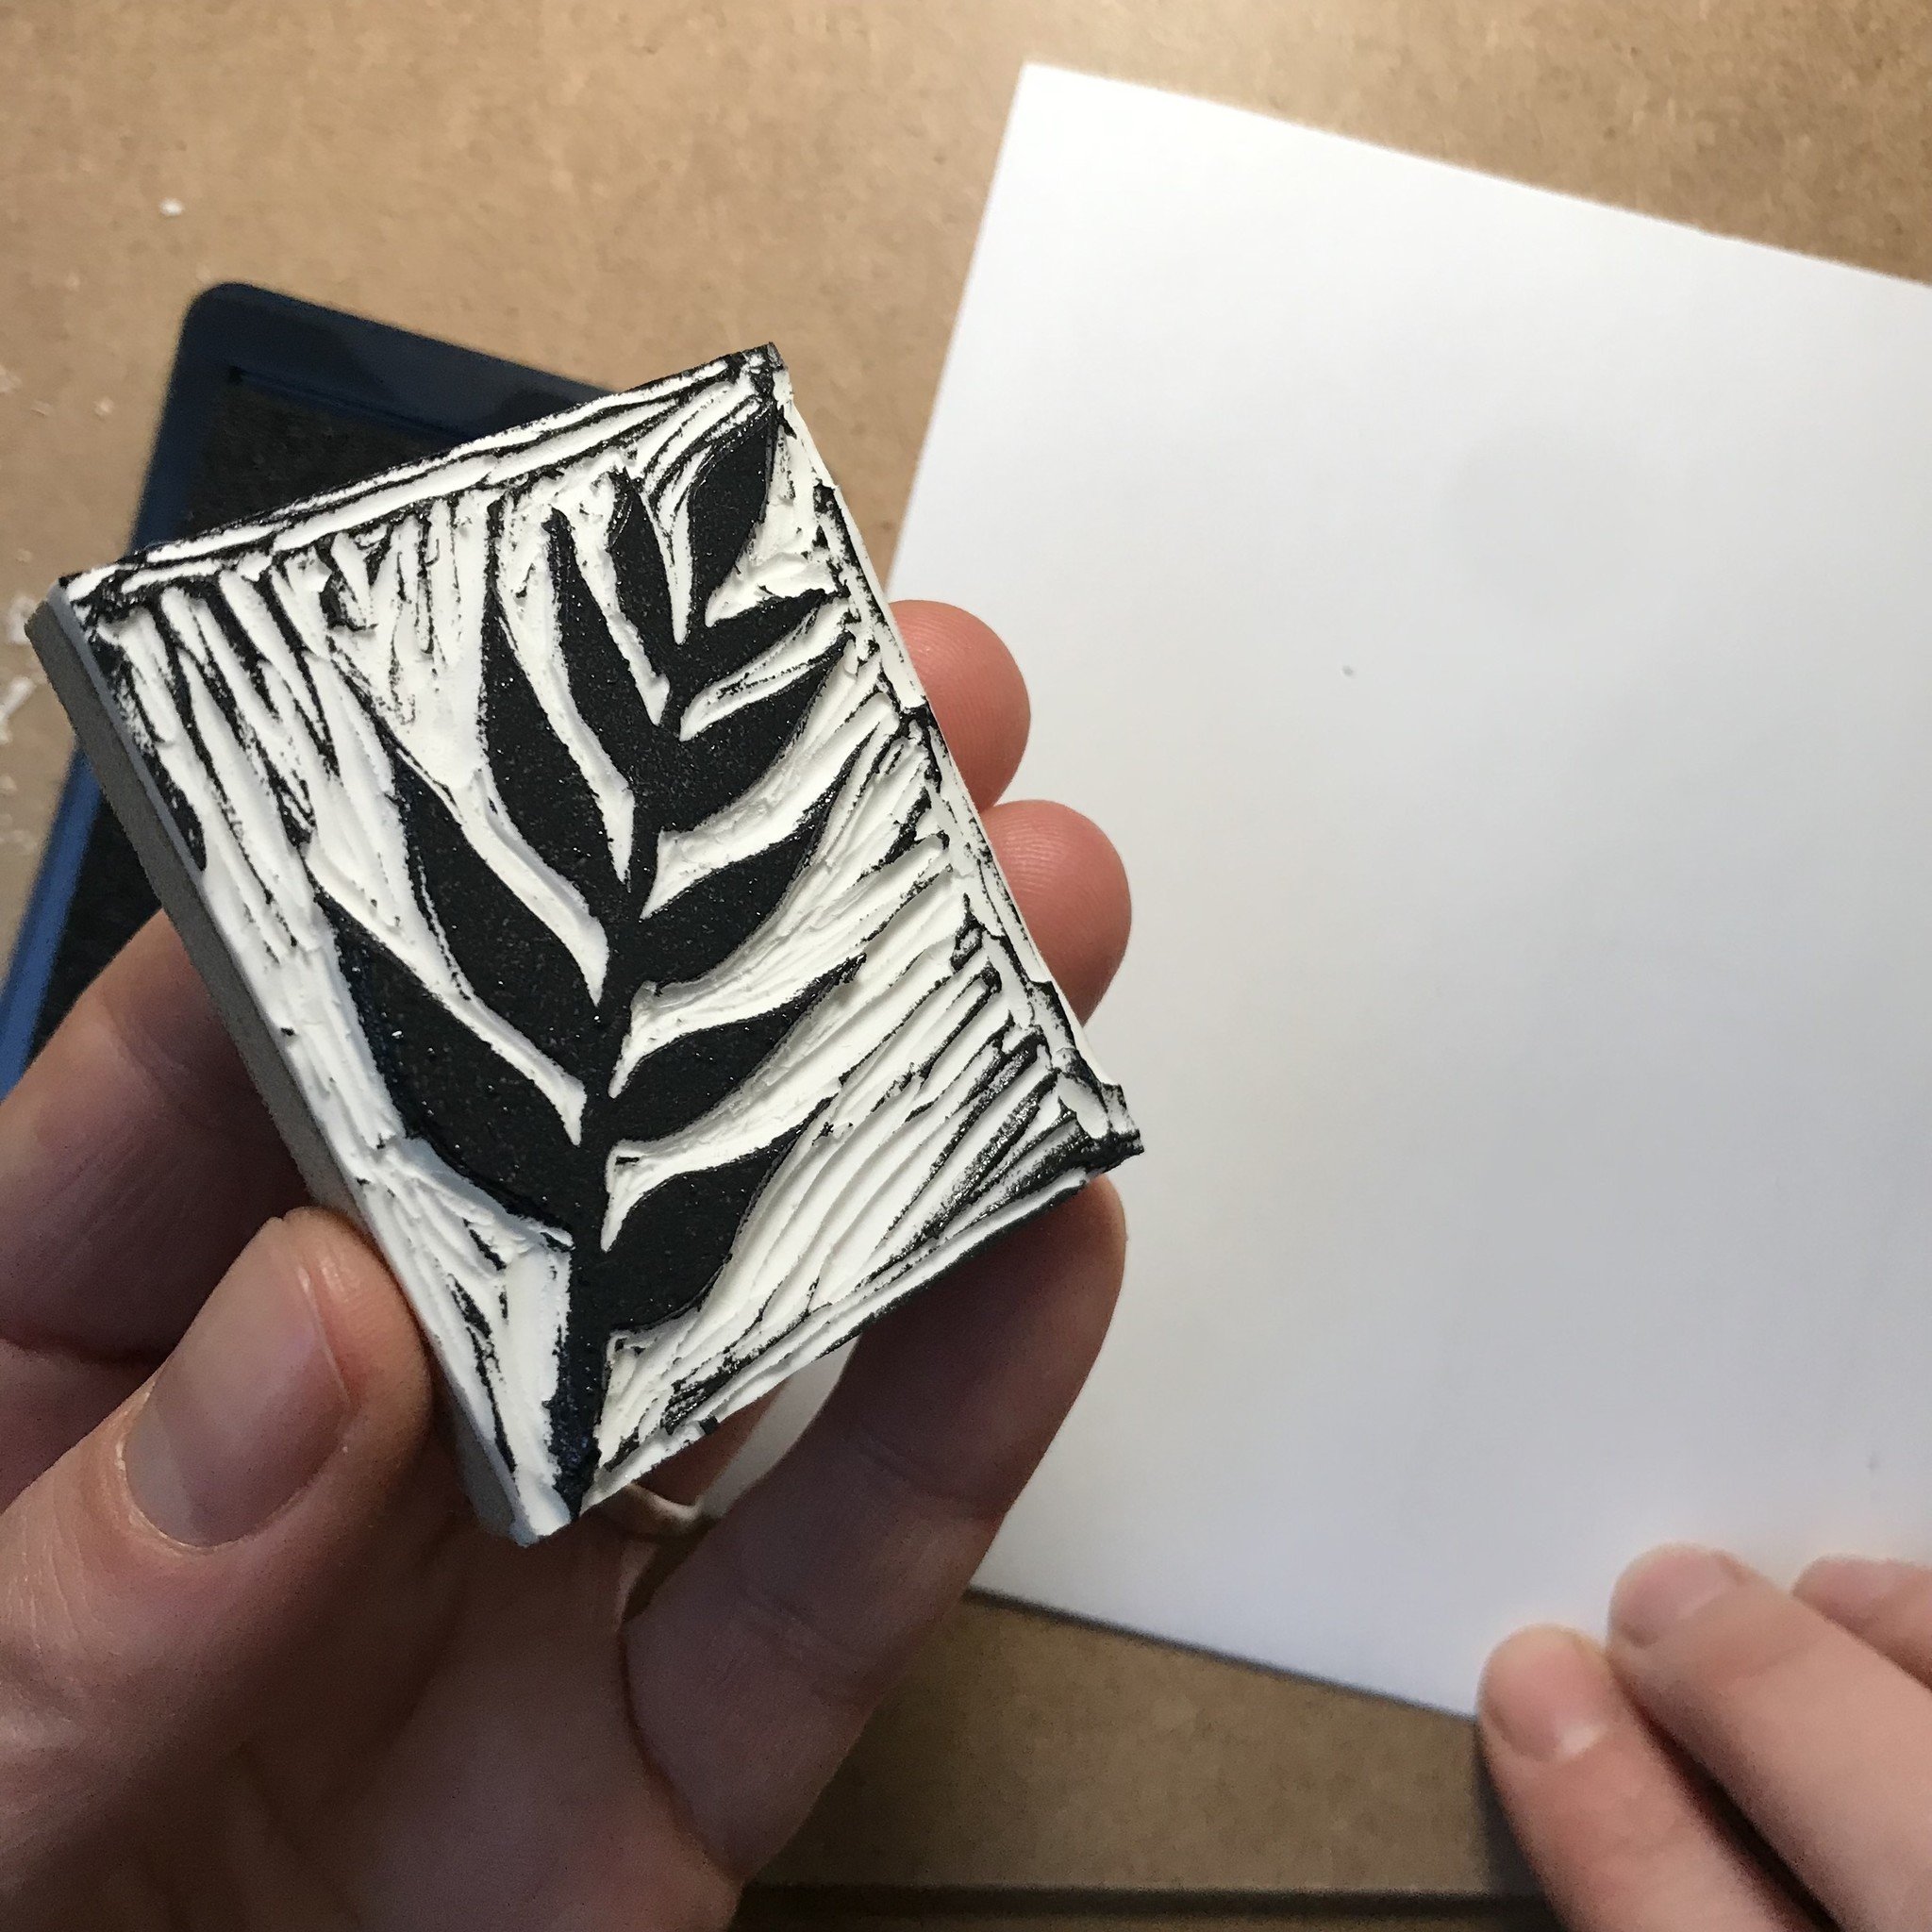 How to Carve your own Stamps: A Step-by-Step Linocut Tutorial